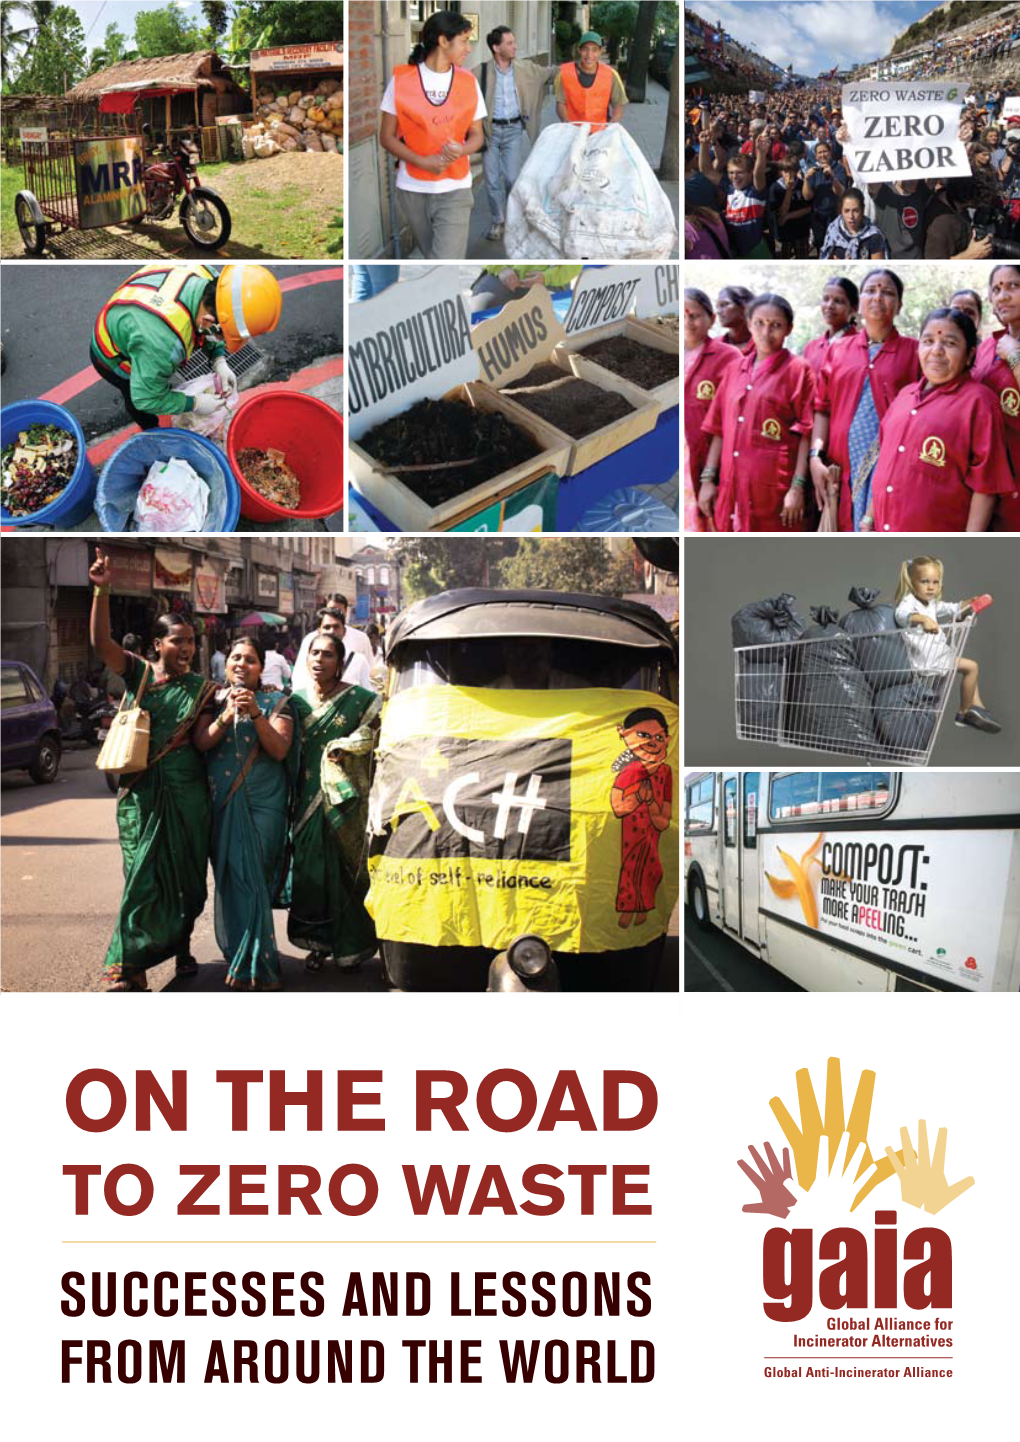 On the Road to Zero Waste Successes and Lessons Global Alliance for Incinerator Alternatives from Around the World Global Anti-Incinerator Alliance